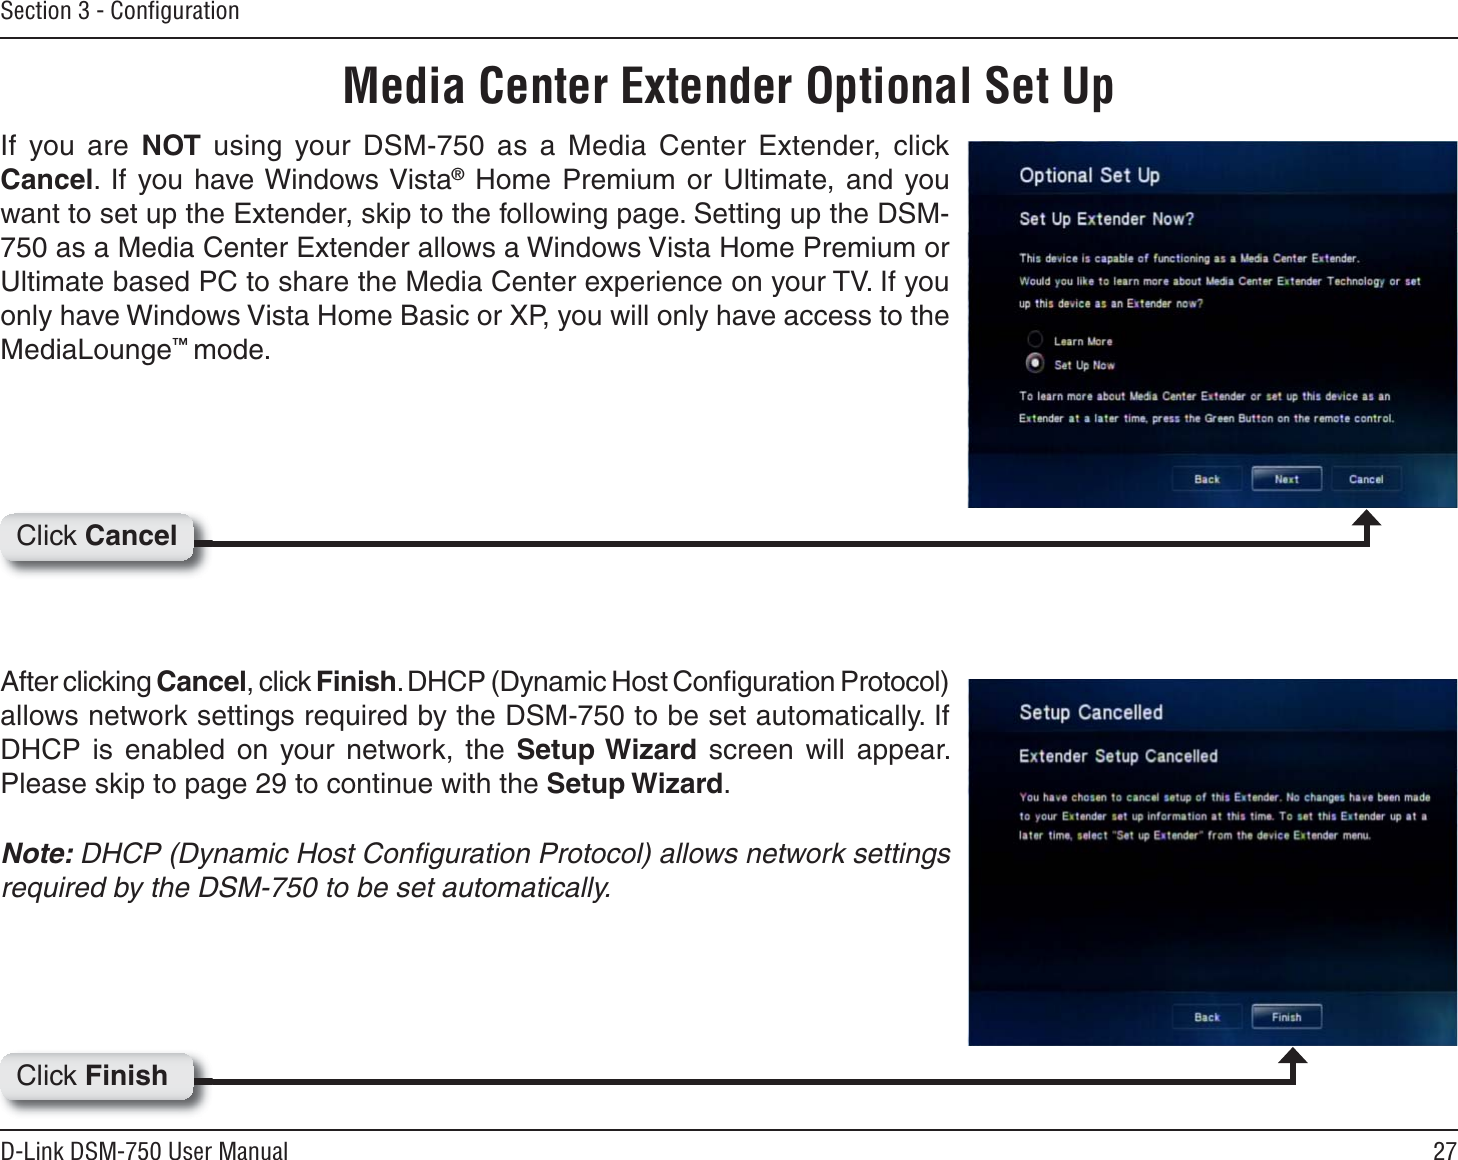 27D-Link DSM-750 User ManualSection 3 - ConﬁgurationMedia Center Extender Optional Set UpIf you are NOT using your DSM-750 as a Media Center Extender, click Cancel. If you have Windows Vista® Home Premium or Ultimate, and you want to set up the Extender, skip to the following page. Setting up the DSM-750 as a Media Center Extender allows a Windows Vista Home Premium or Ultimate based PC to share the Media Center experience on your TV. If you only have Windows Vista Home Basic or XP, you will only have access to the MediaLounge™mode.After clicking Cancel, click Finish. DHCP (Dynamic Host Conﬁguration Protocol) allows network settings required by the DSM-750 to be set automatically. If DHCP is enabled on your network, the Setup Wizard screen will appear. Please skip to page 29 to continue with the Setup Wizard.Note: DHCP (Dynamic Host Conﬁguration Protocol) allows network settings required by the DSM-750 to be set automatically.Click CancelClick Finish